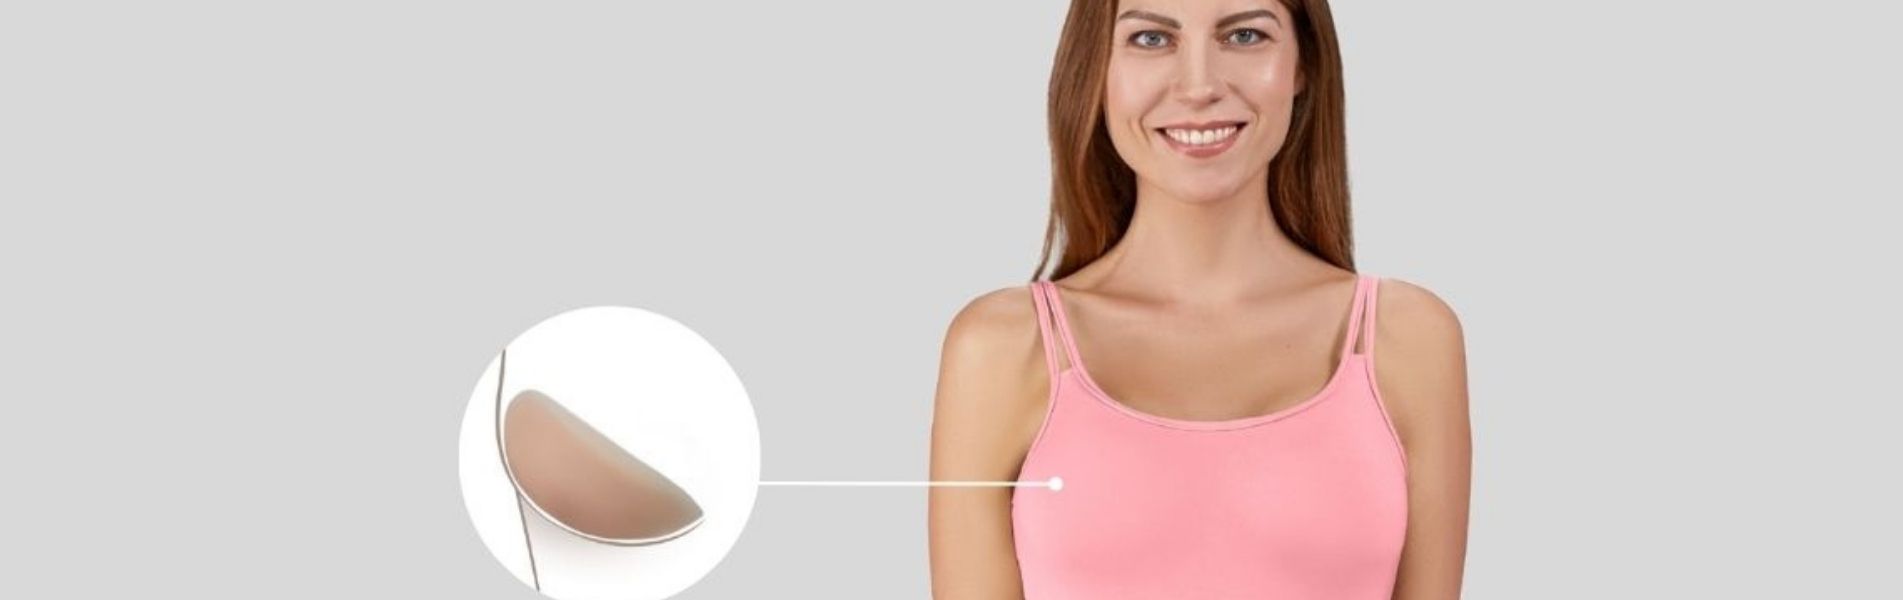 Balance Contact Partial Breast Shapers